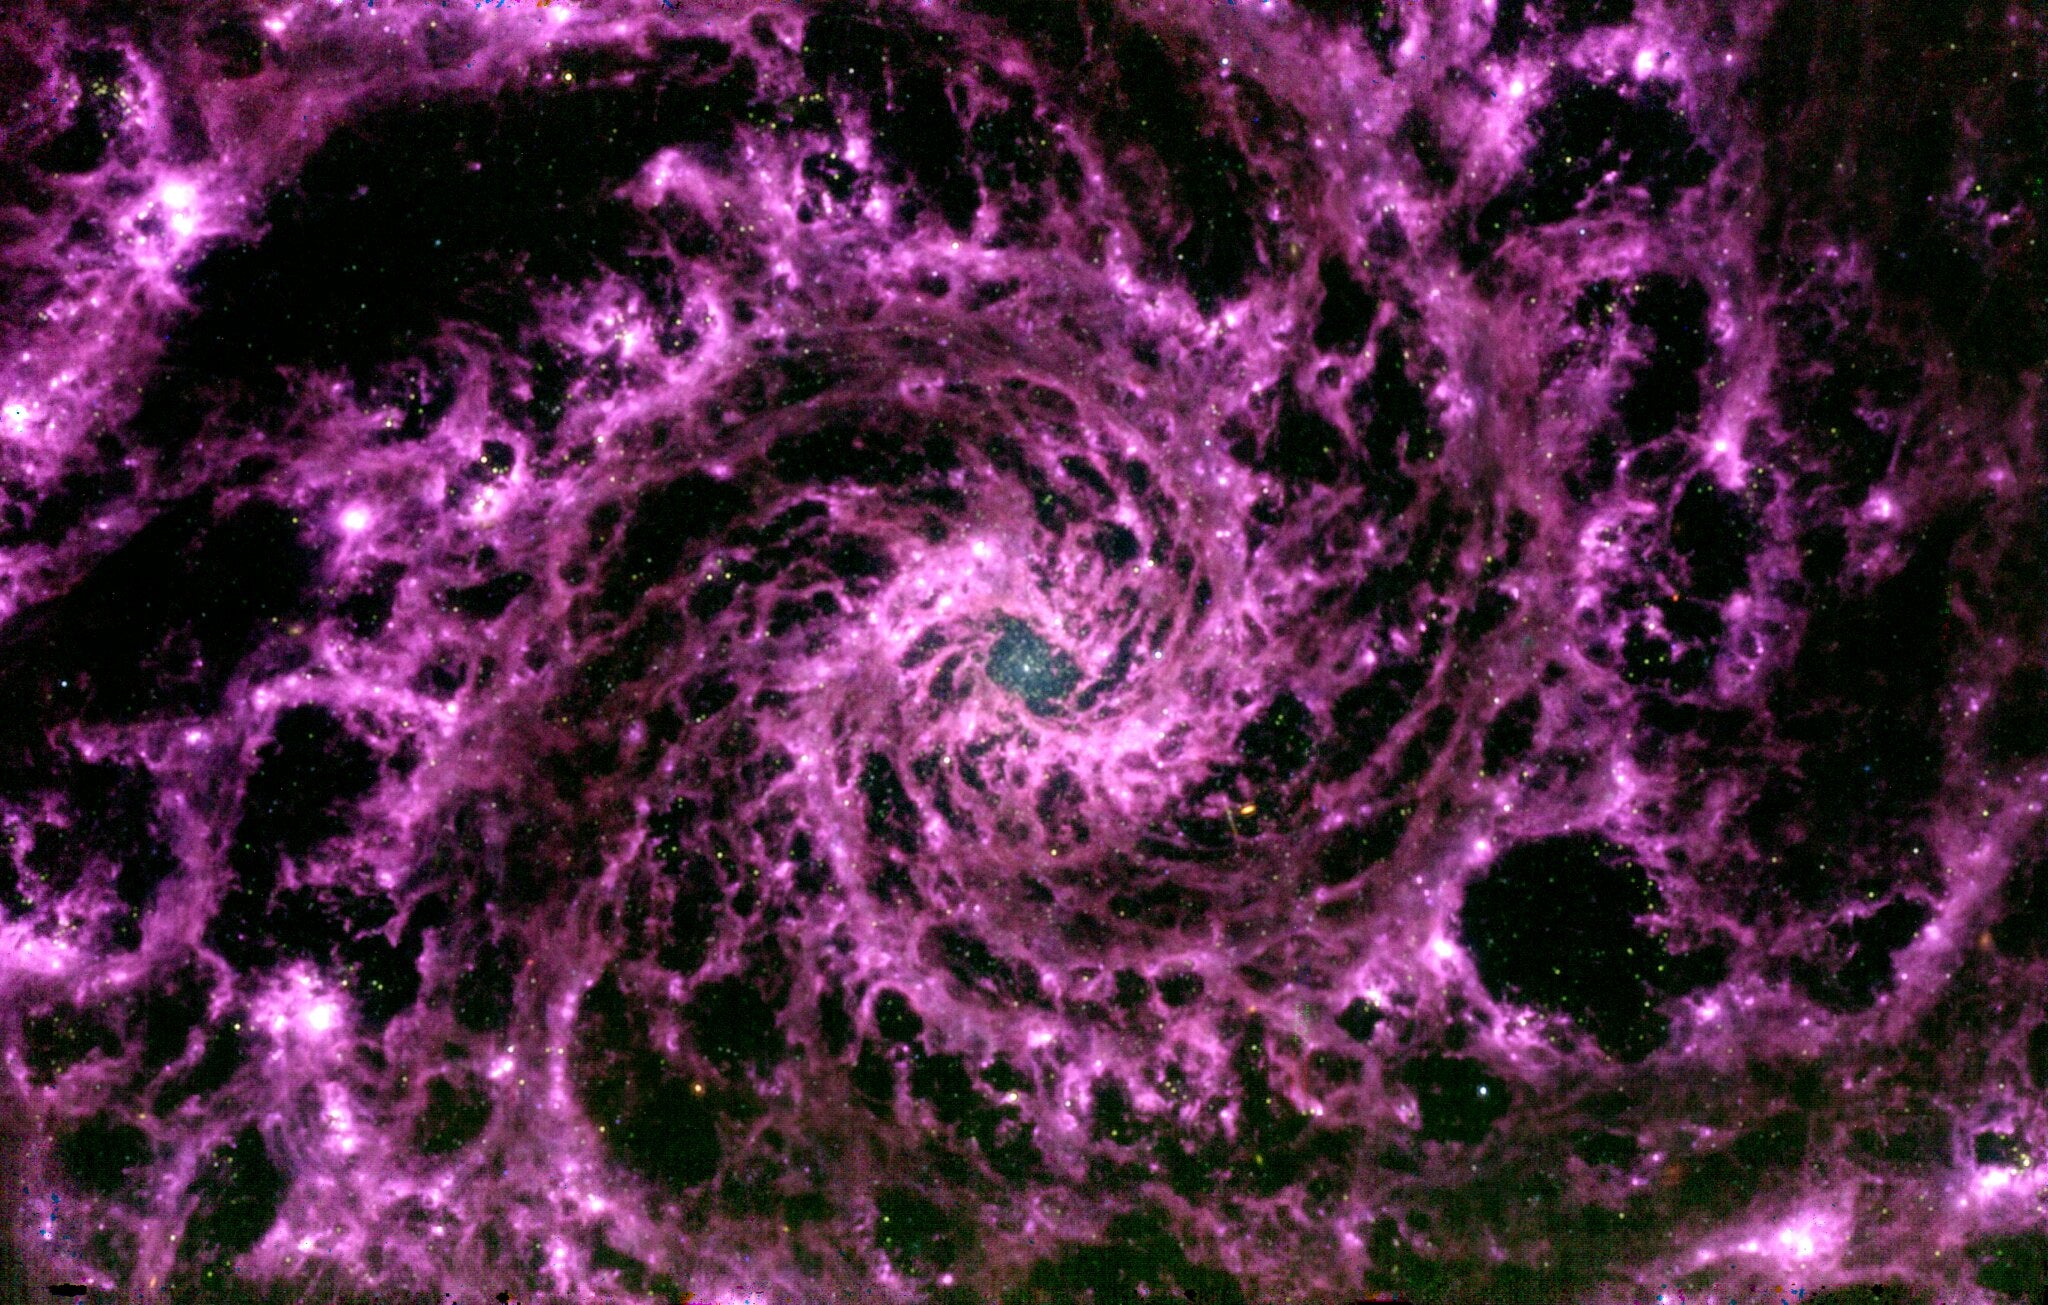 A mid-infrared image of the galaxy NGC 628 taken by the James Webb Space Telescope on 17 July